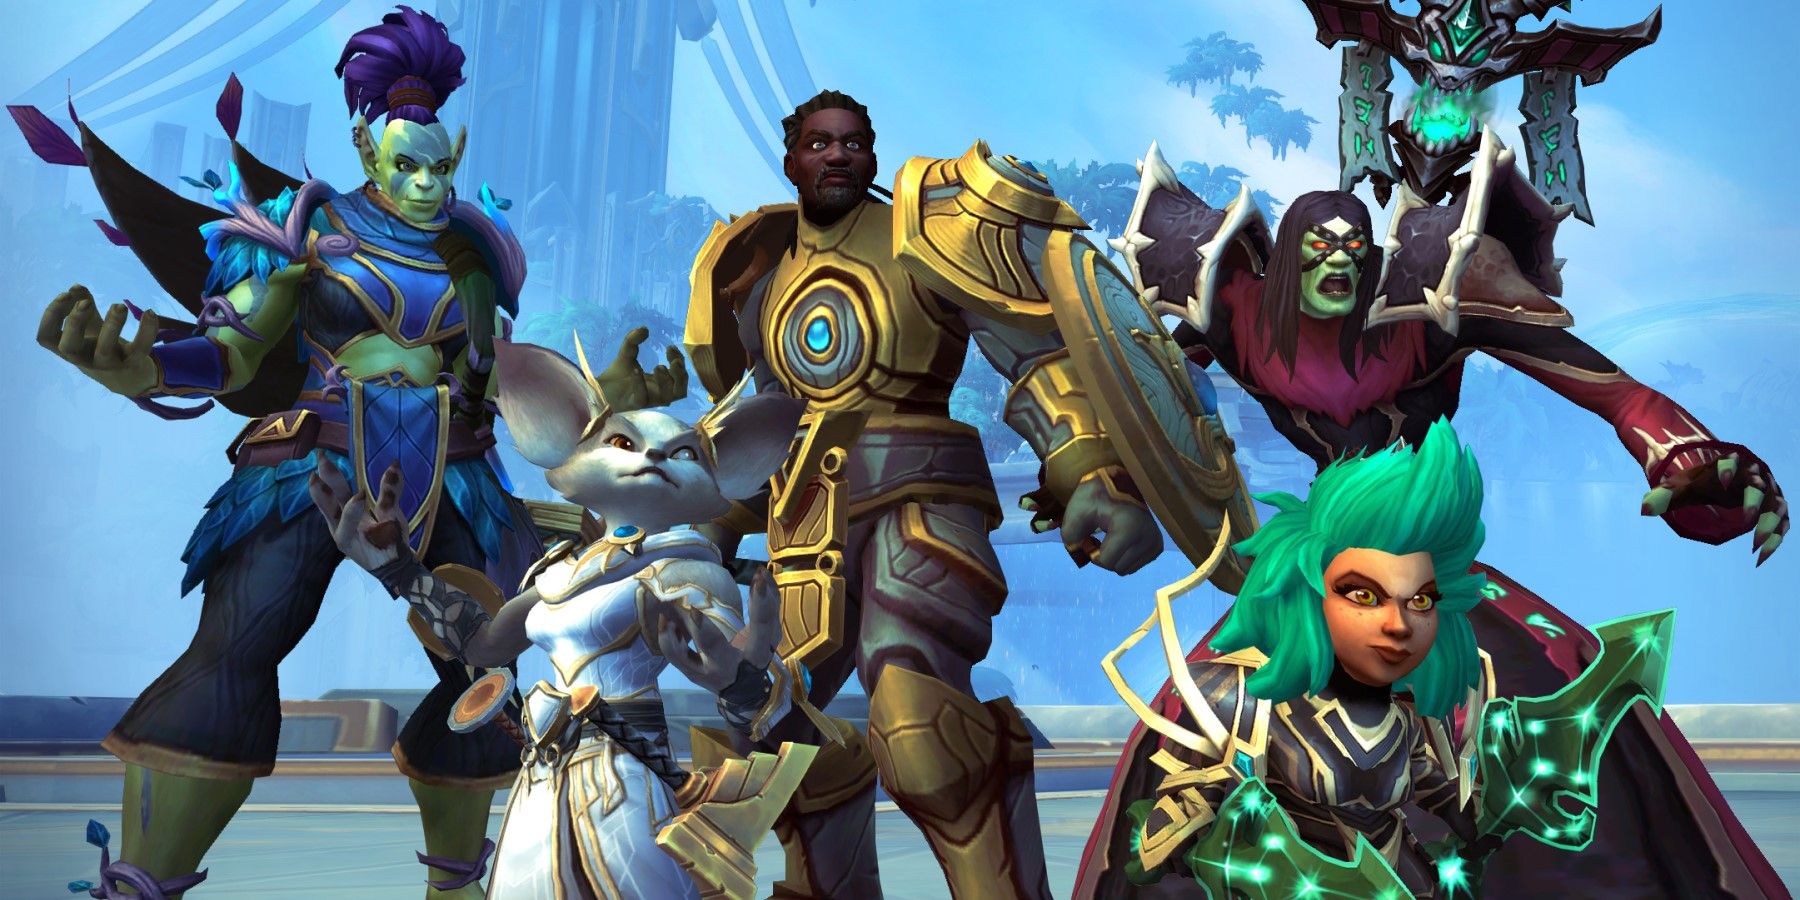 a cross faction party consisting of an orc, vulpera, human, gnome, and undead from wow in bastion